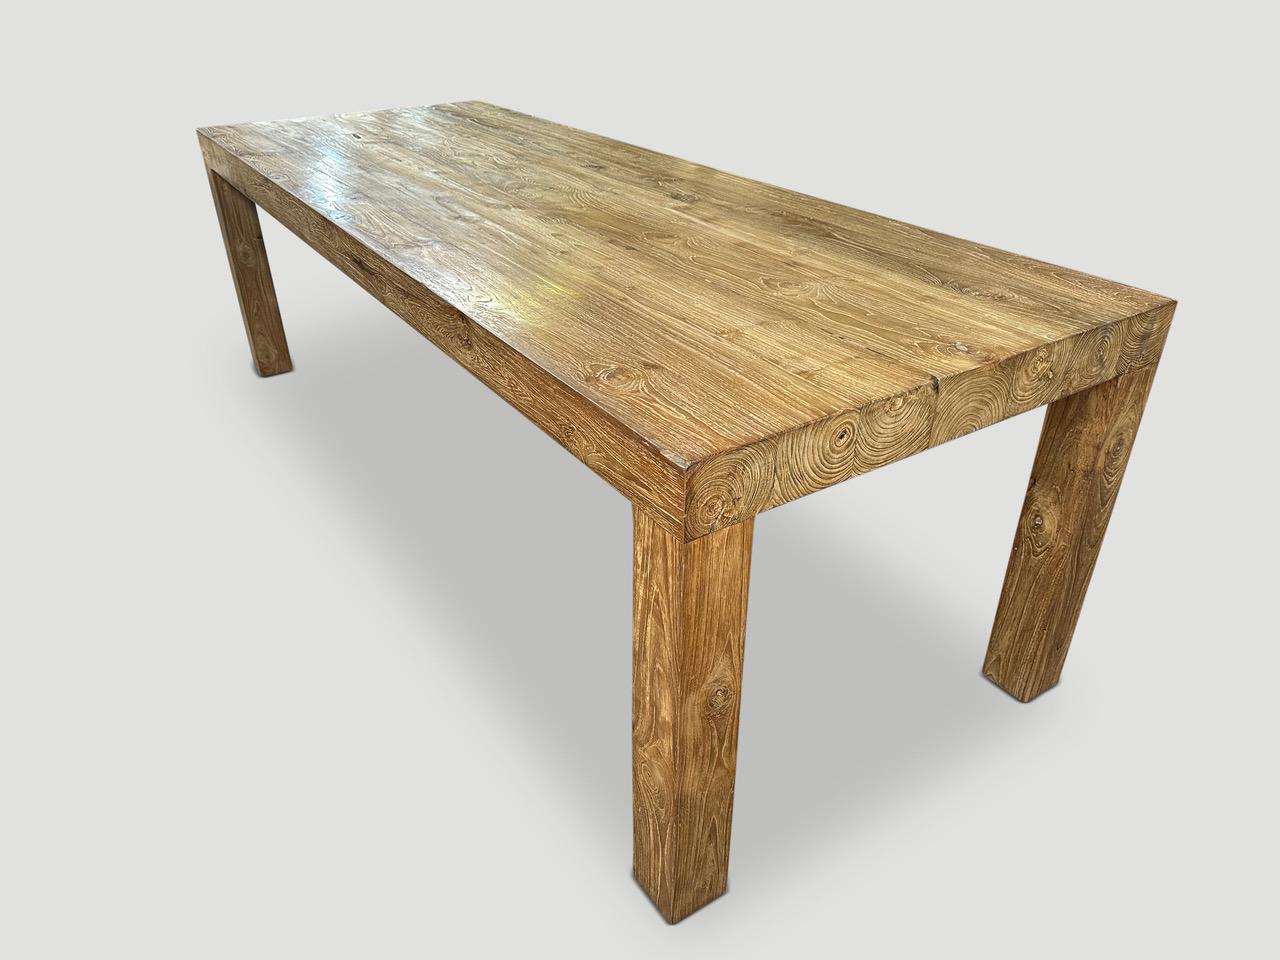 Contemporary Andrianna Shamaris Modern Teak Wood Dining Table For Sale